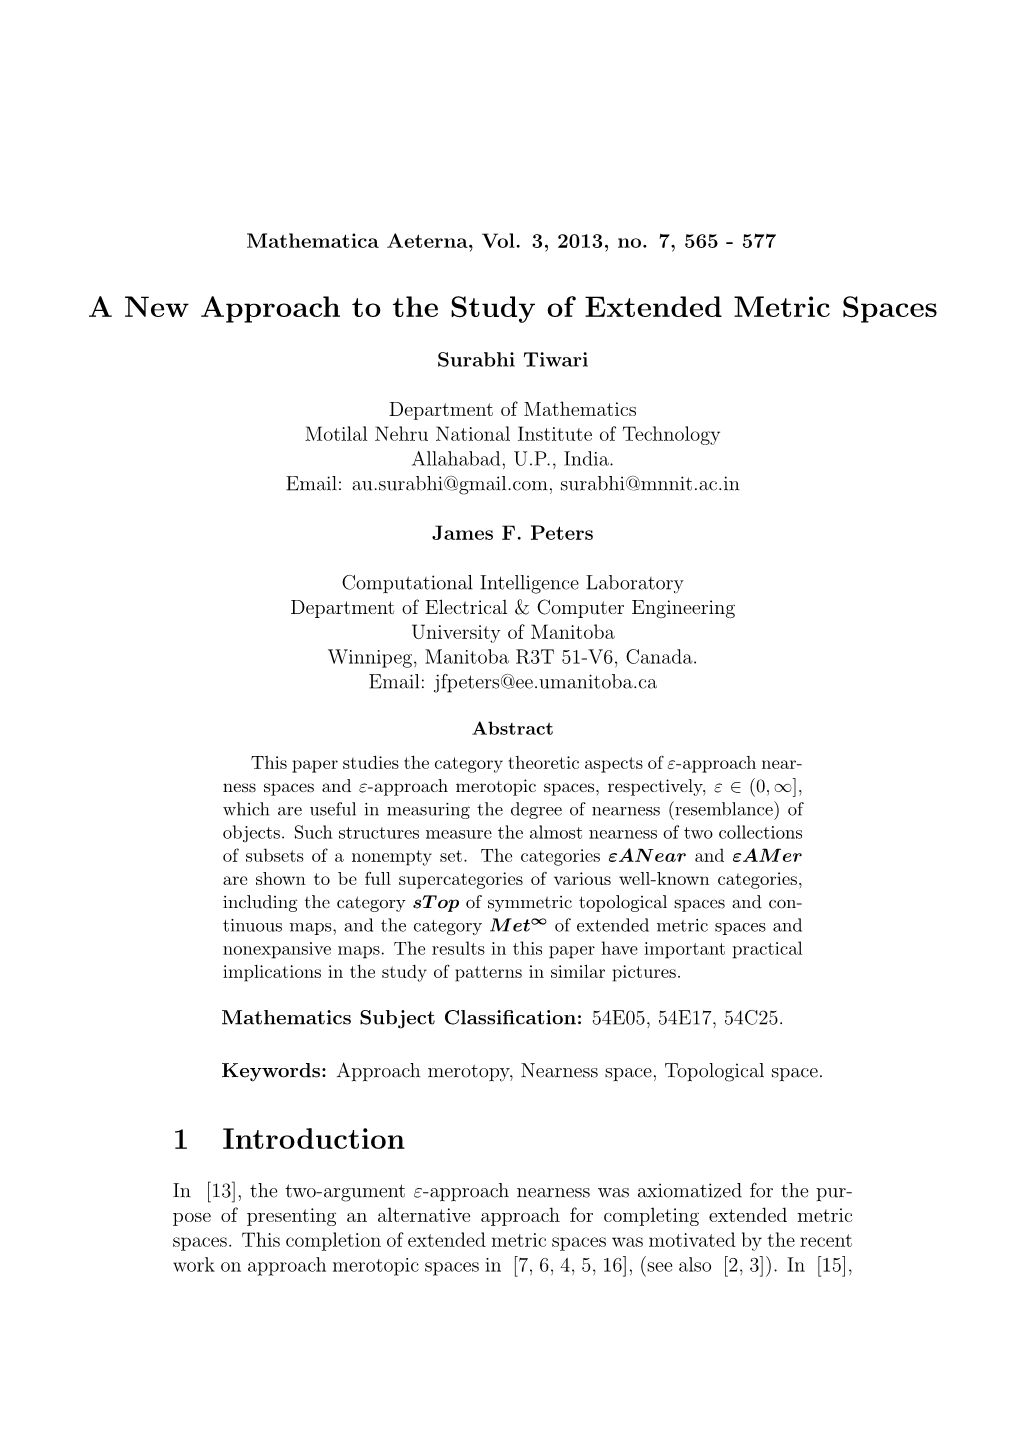 A New Approach to the Study of Extended Metric Spaces 1